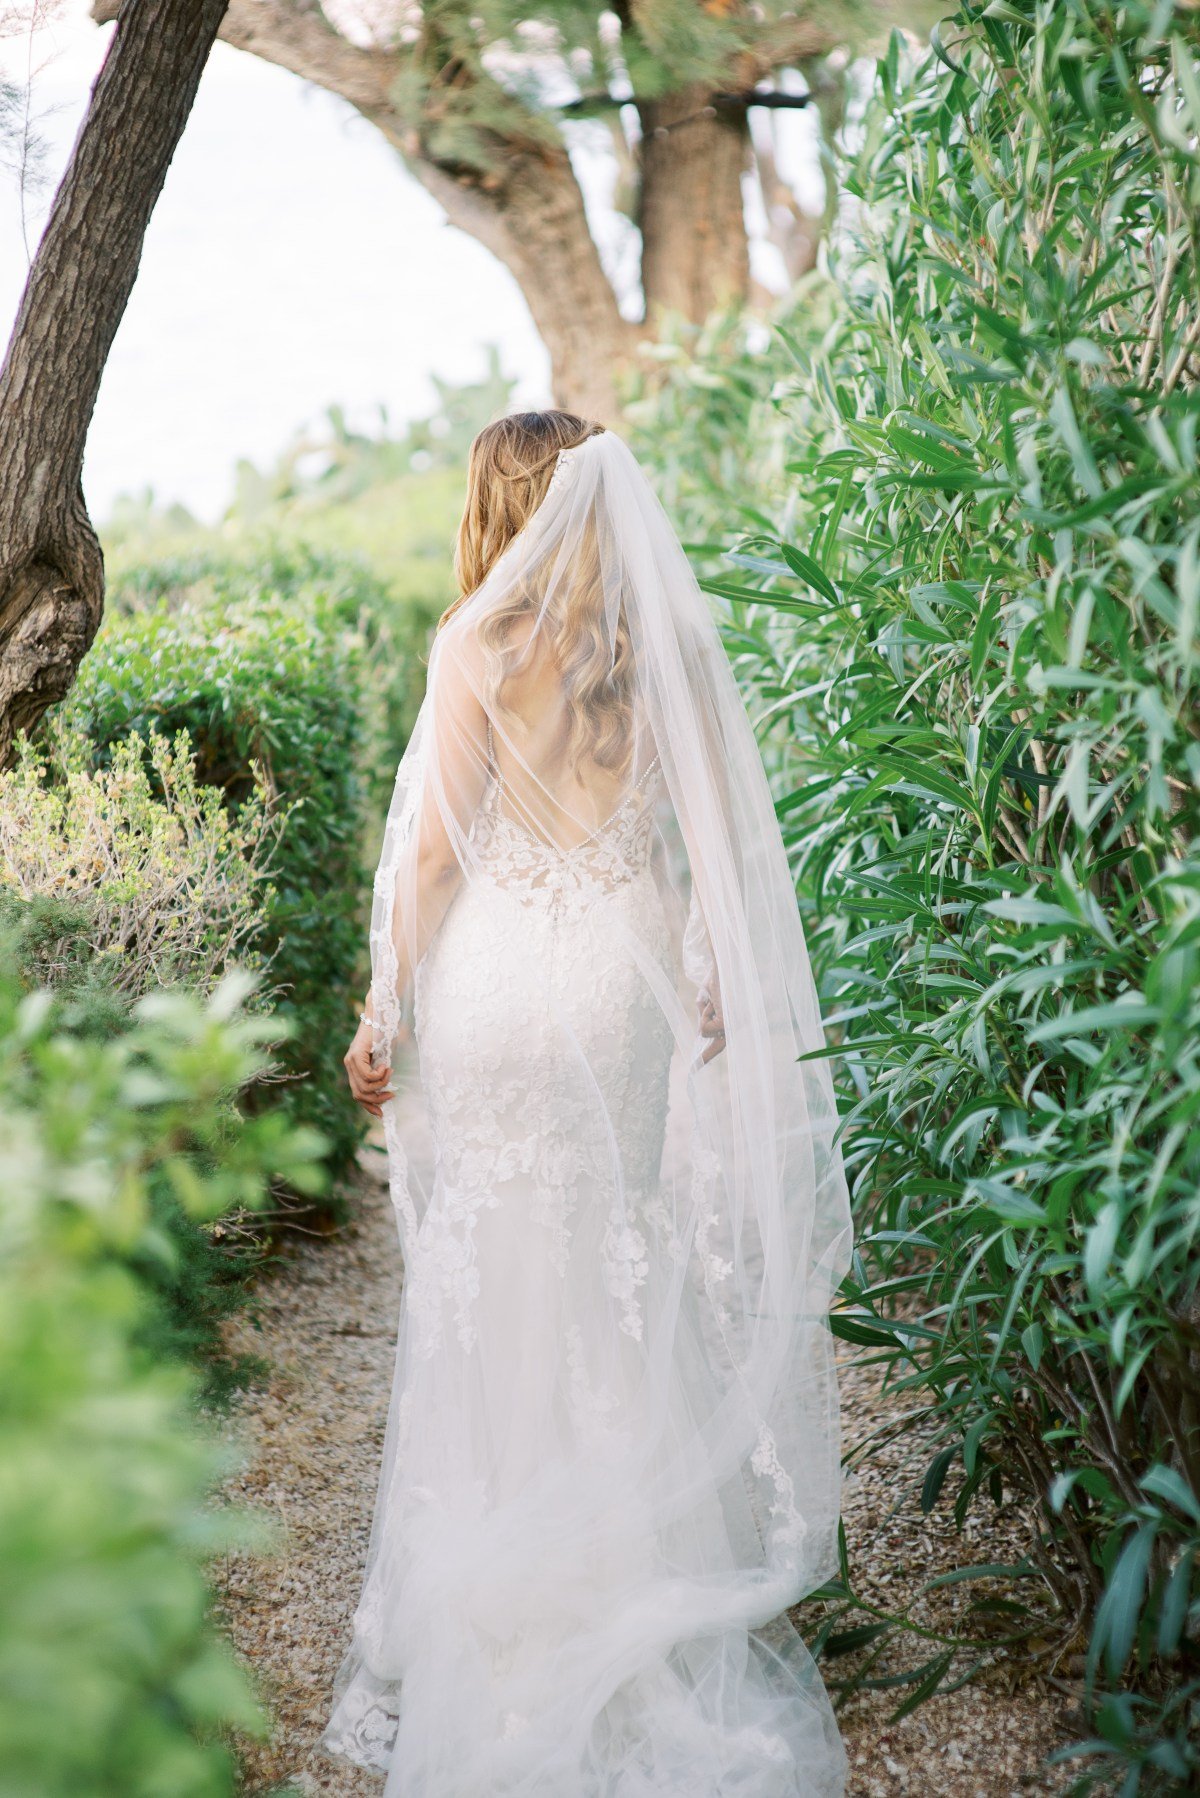 Bride walkin amongst the leaves - les anagnou editorial wedding photography